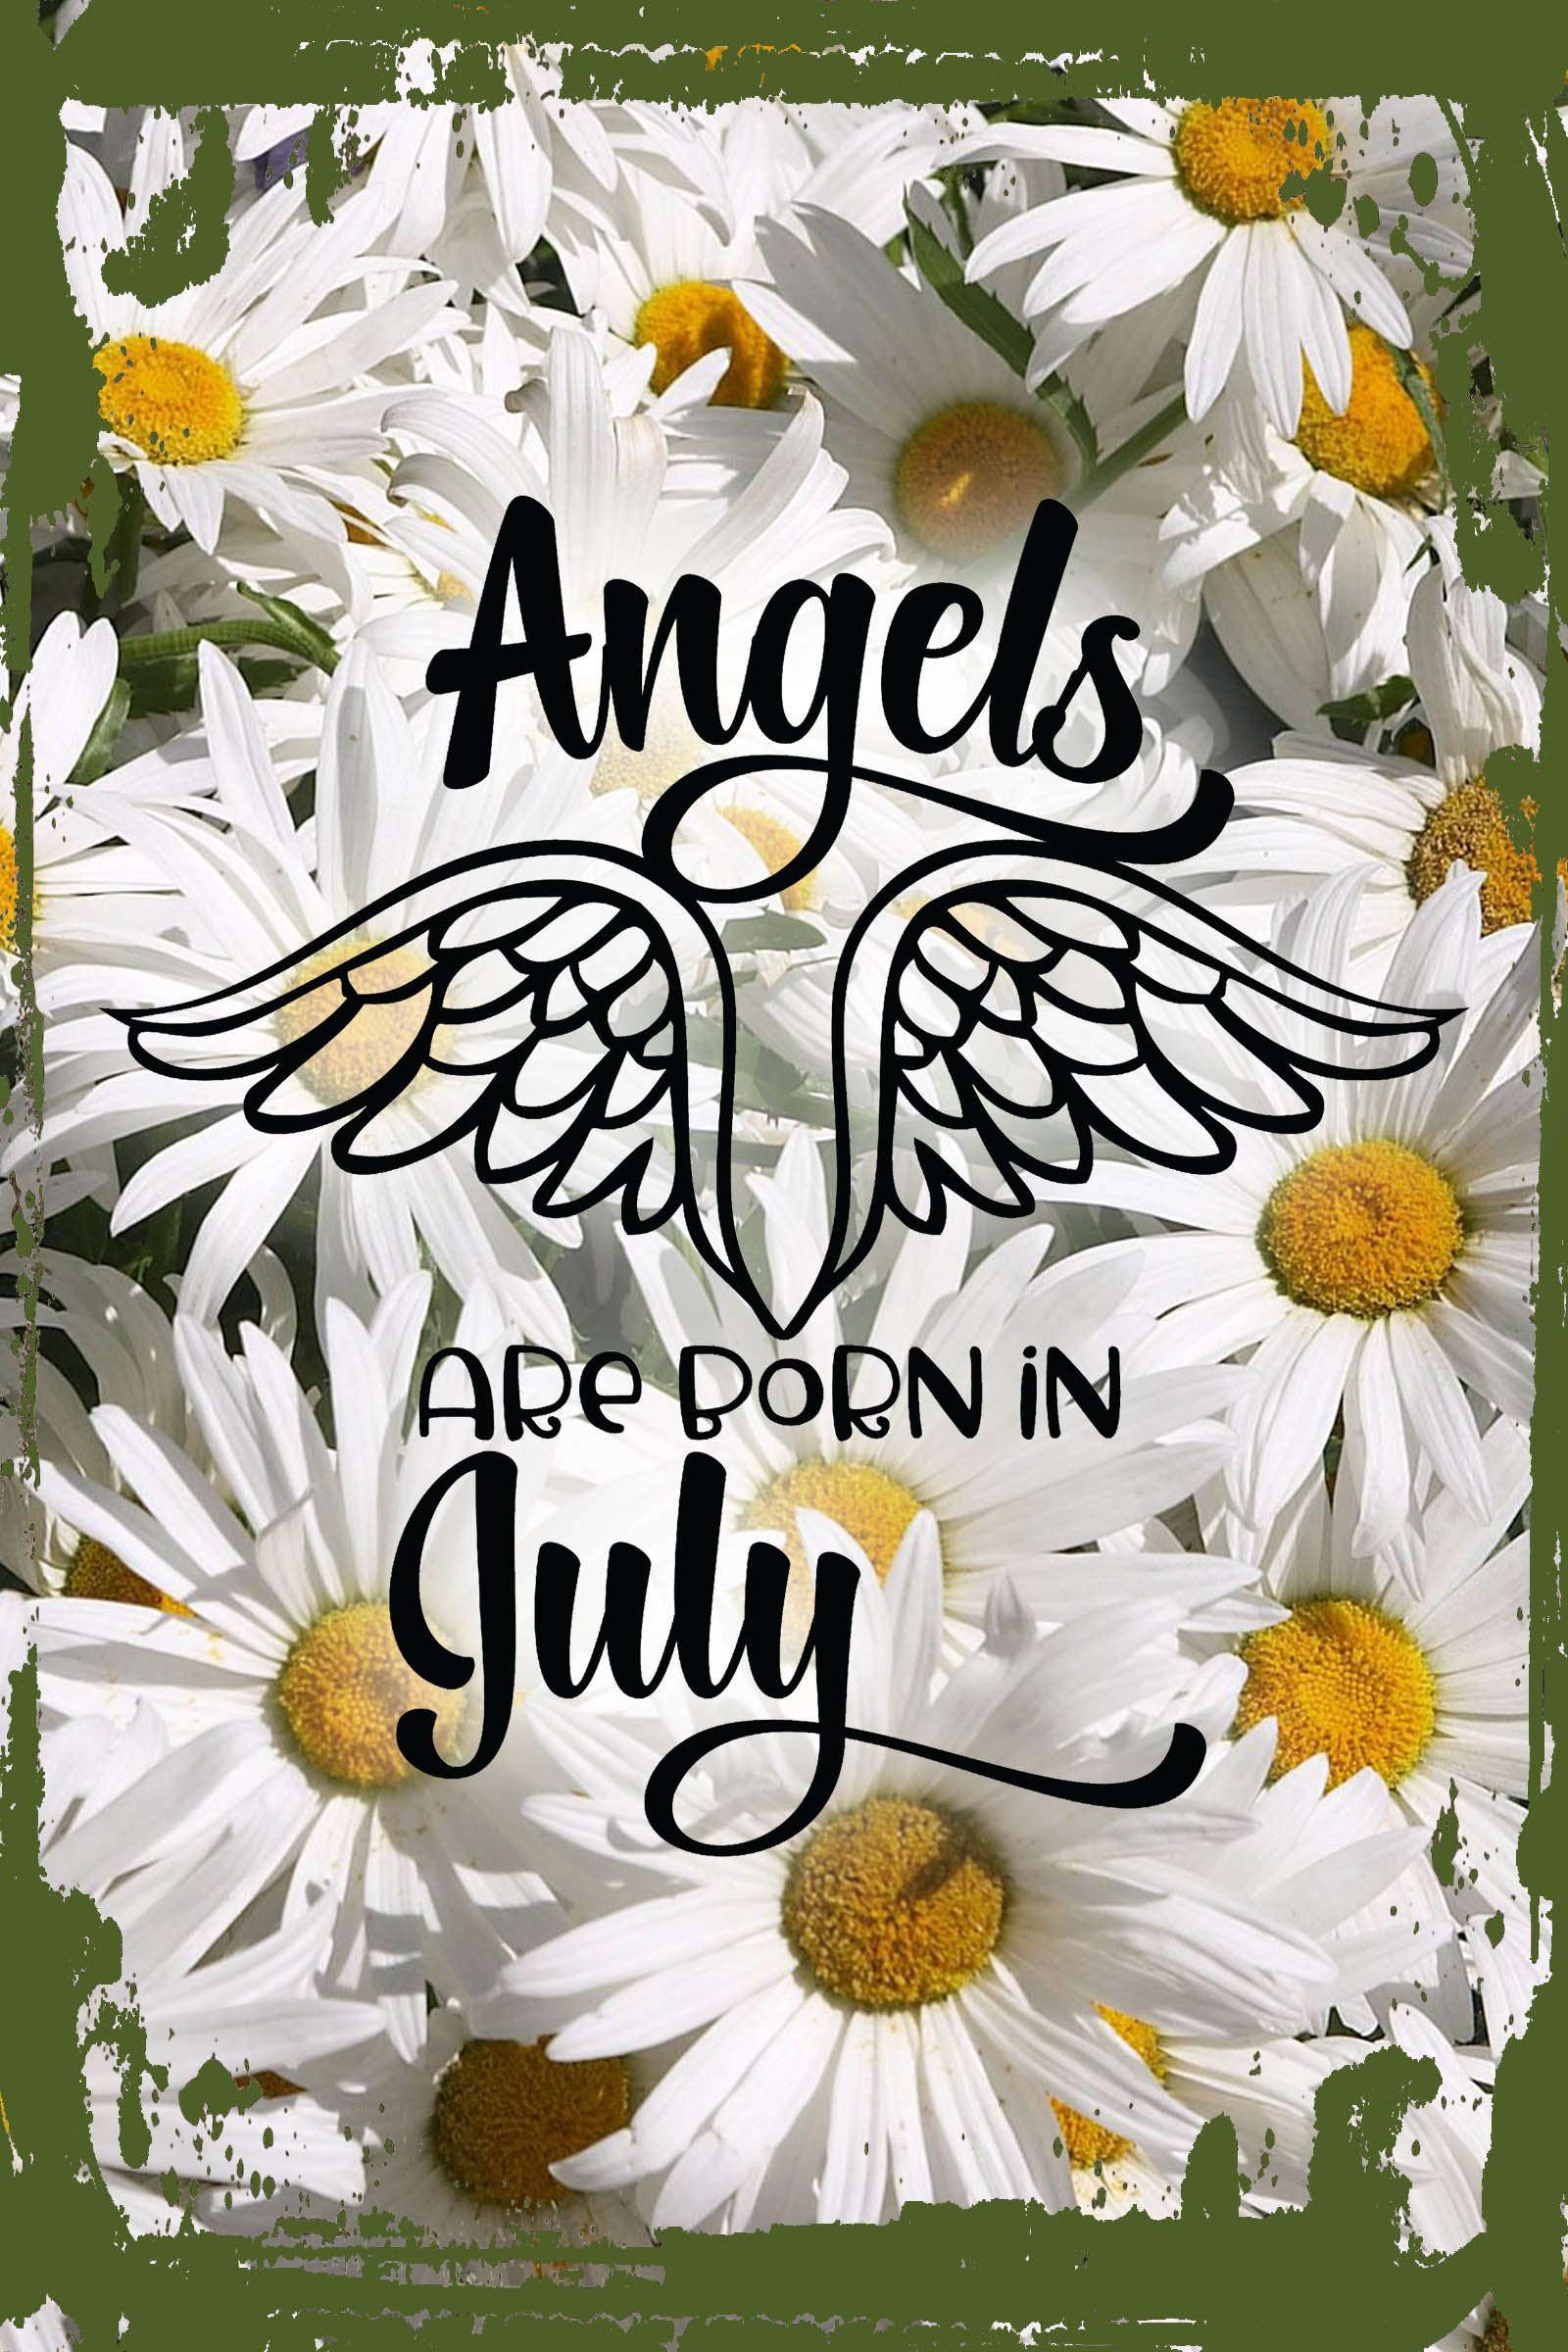 Daisy Flower Wall Art Angels are born in July special angel wings guardian birthday Tin Wall Sign 8 x 12 Decor Funny Gift - image 1 of 1